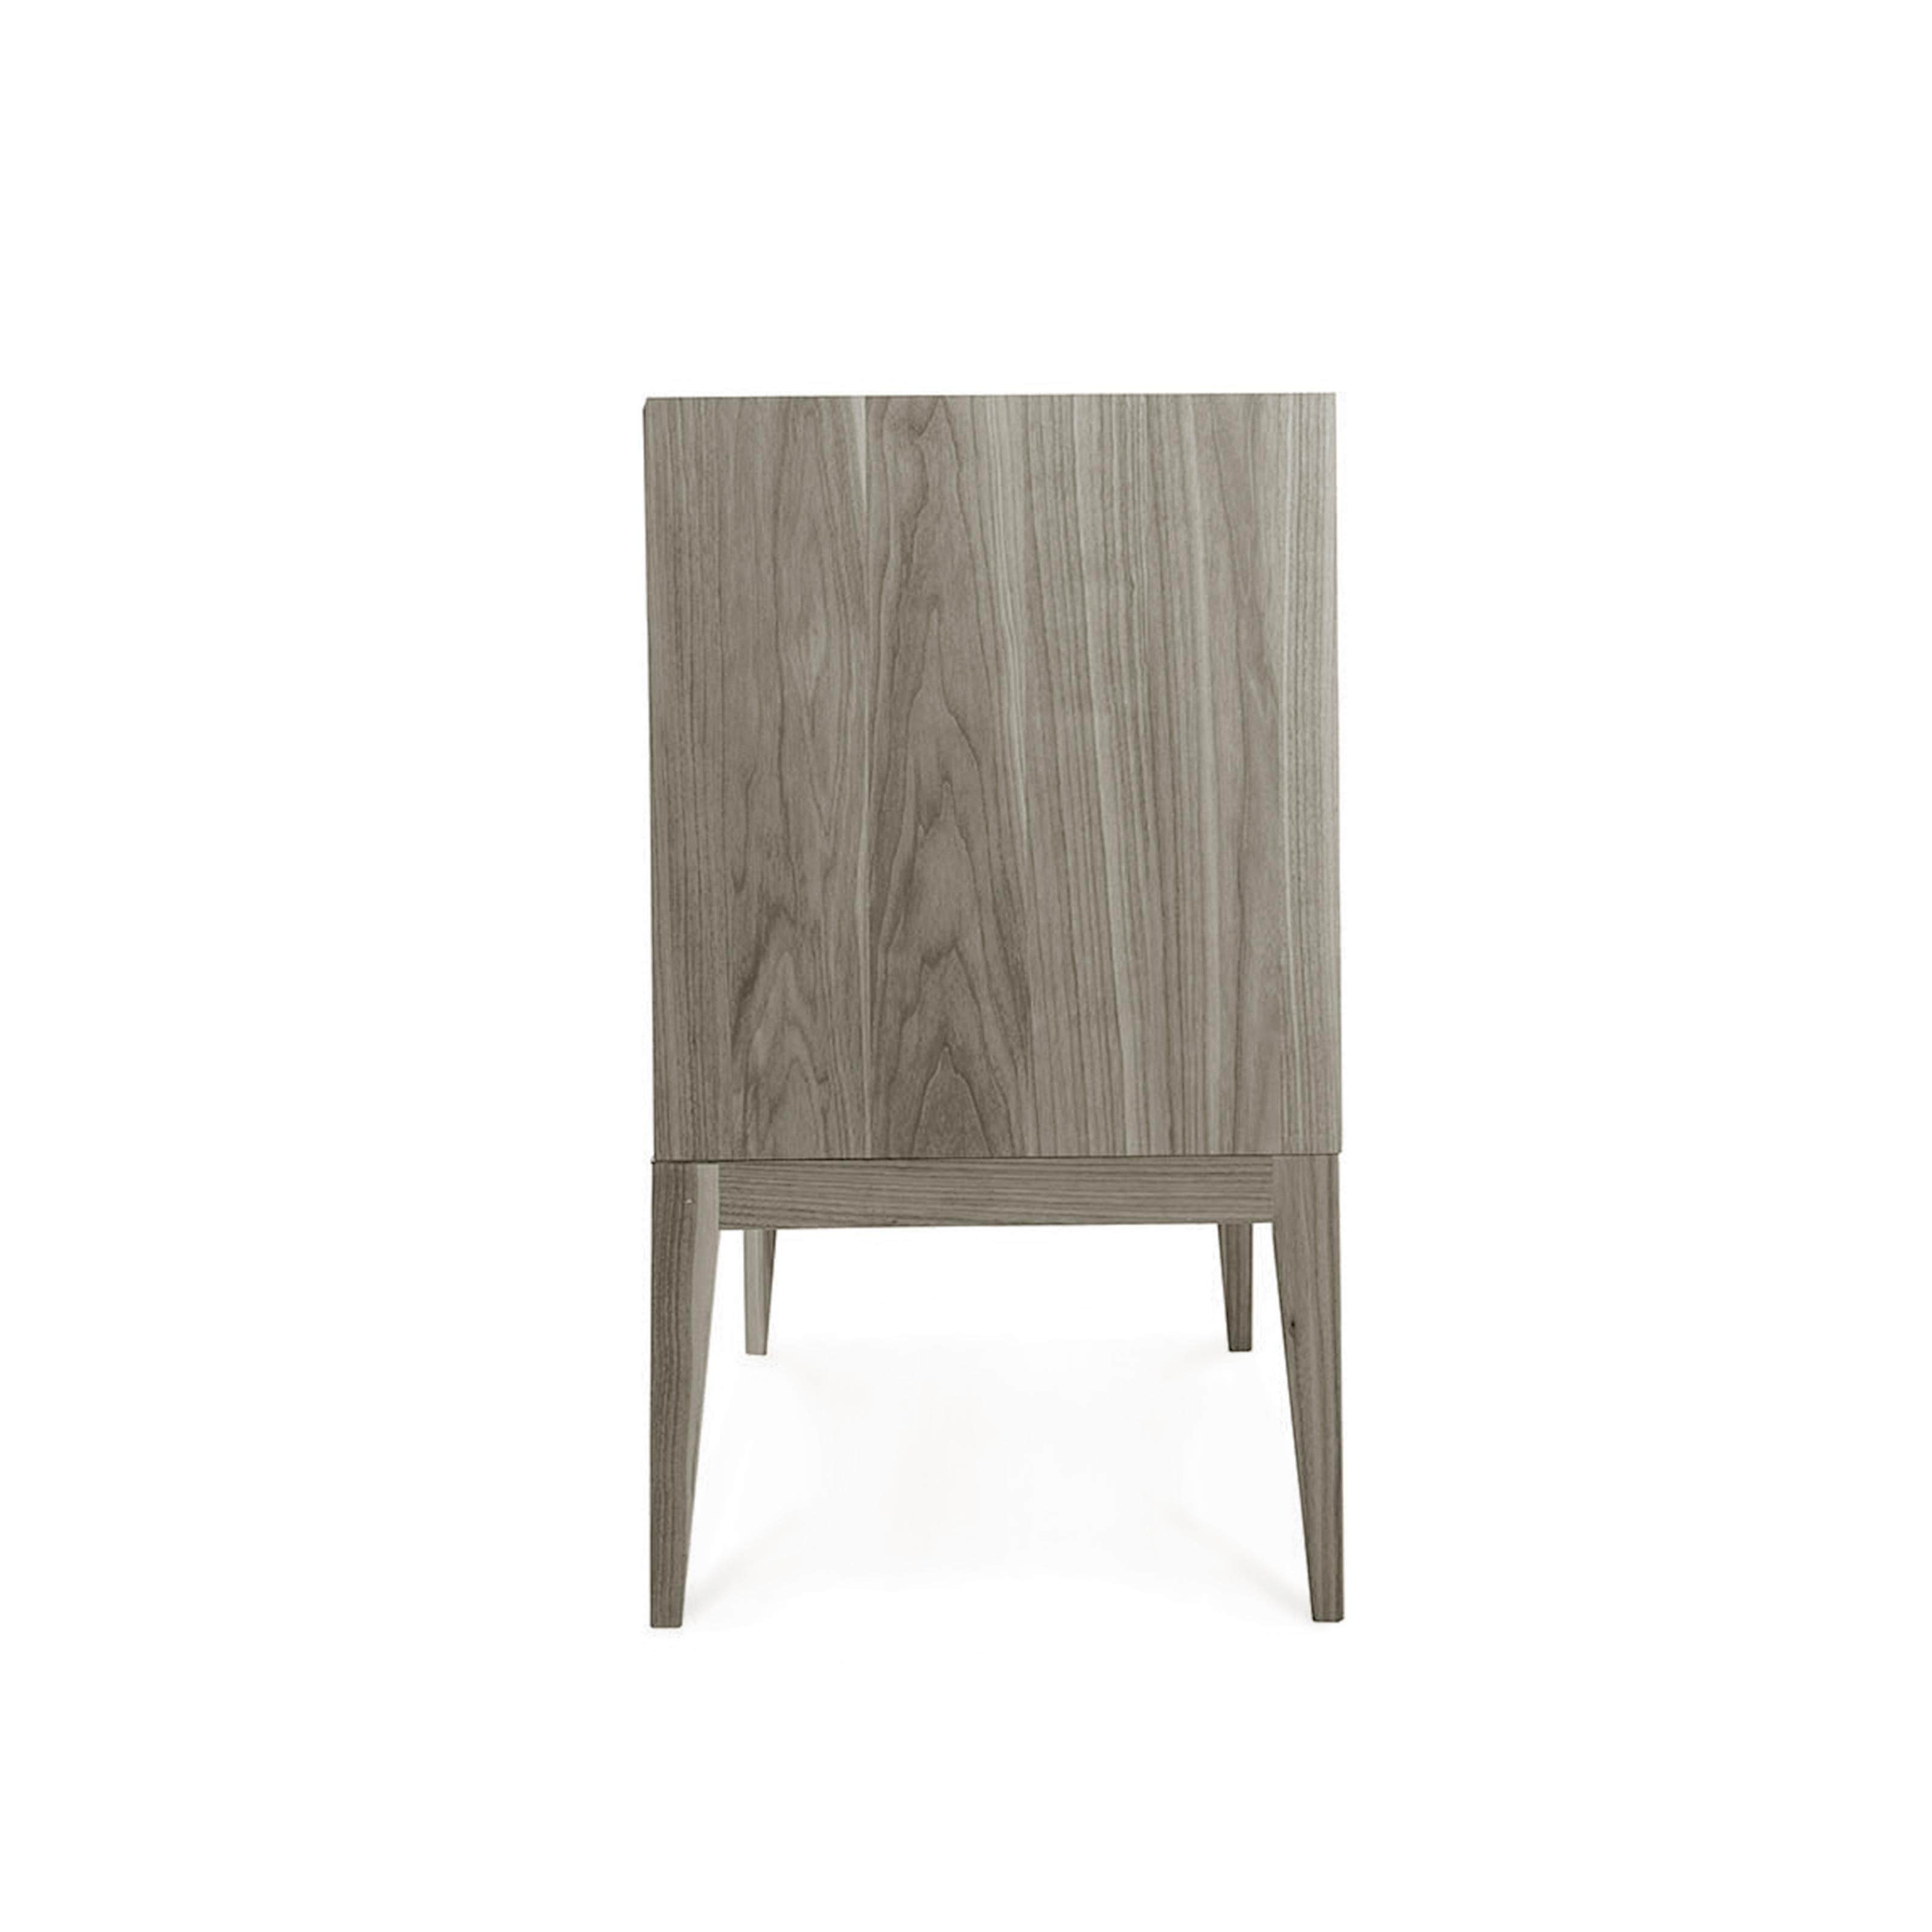 Italian Eleva Solid Wood Sideboard, Walnut in Natural Grey Finish, Contemporary For Sale